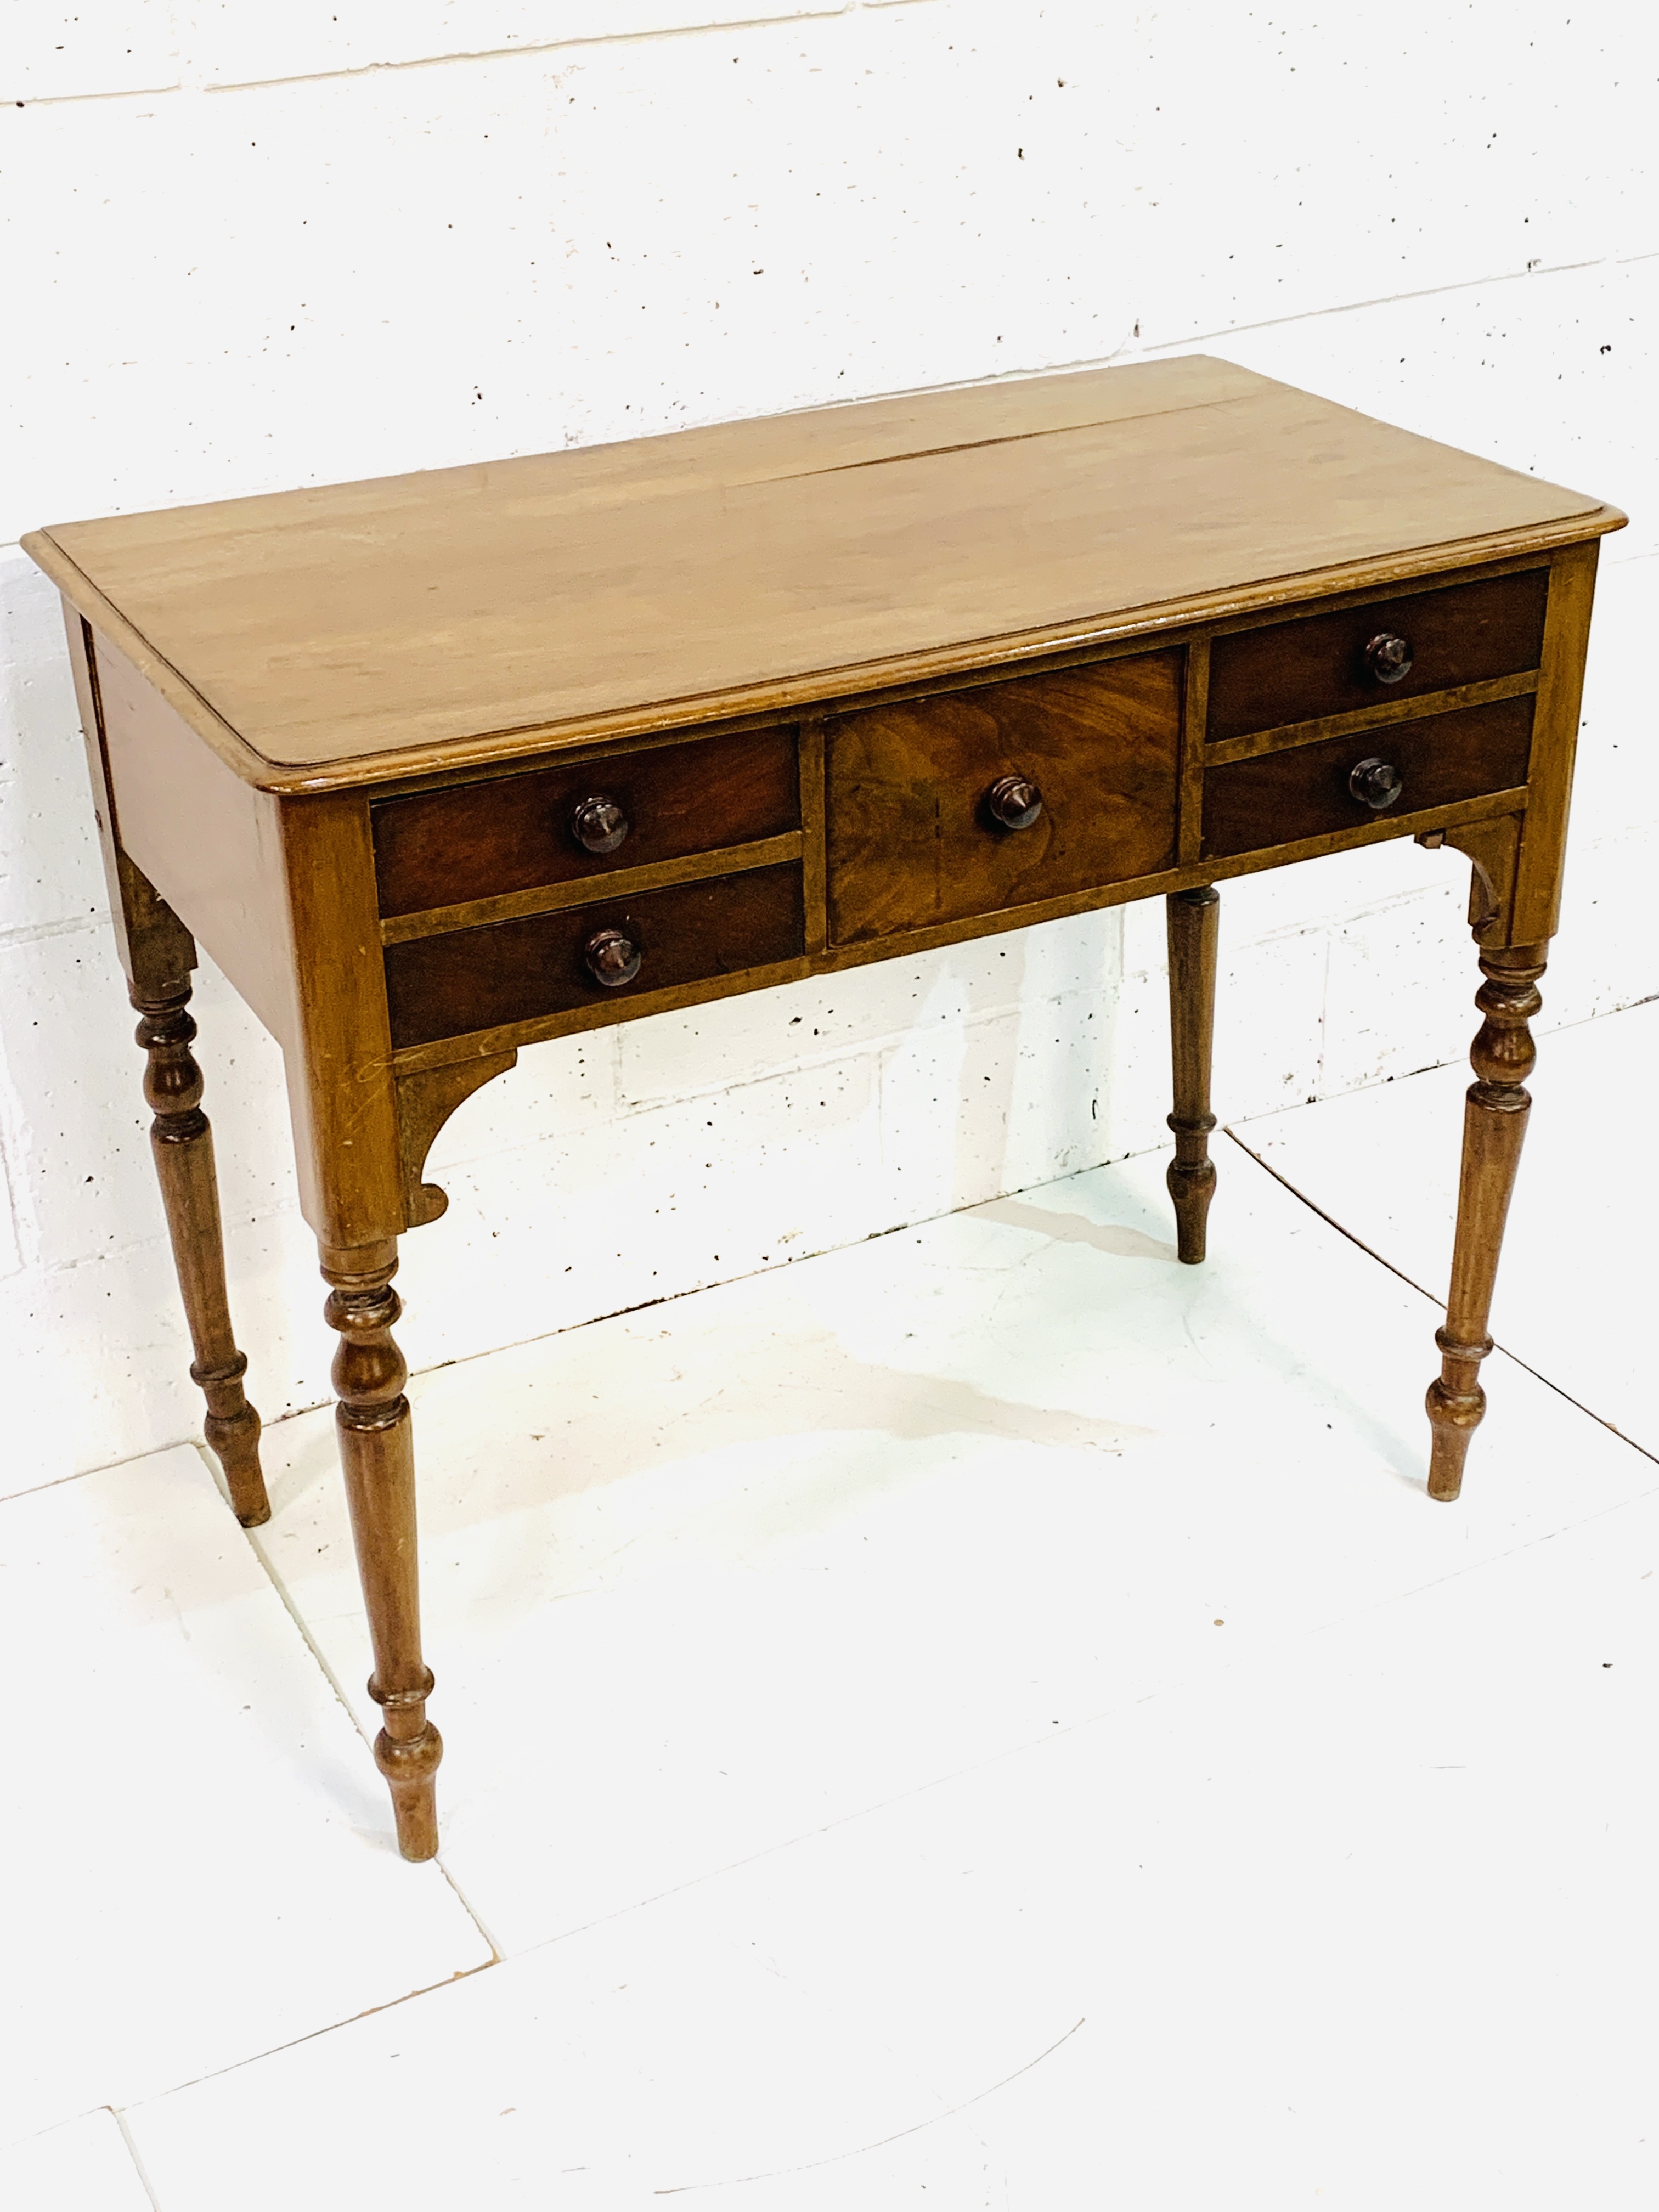 Victorian mahogany side table - Image 2 of 6